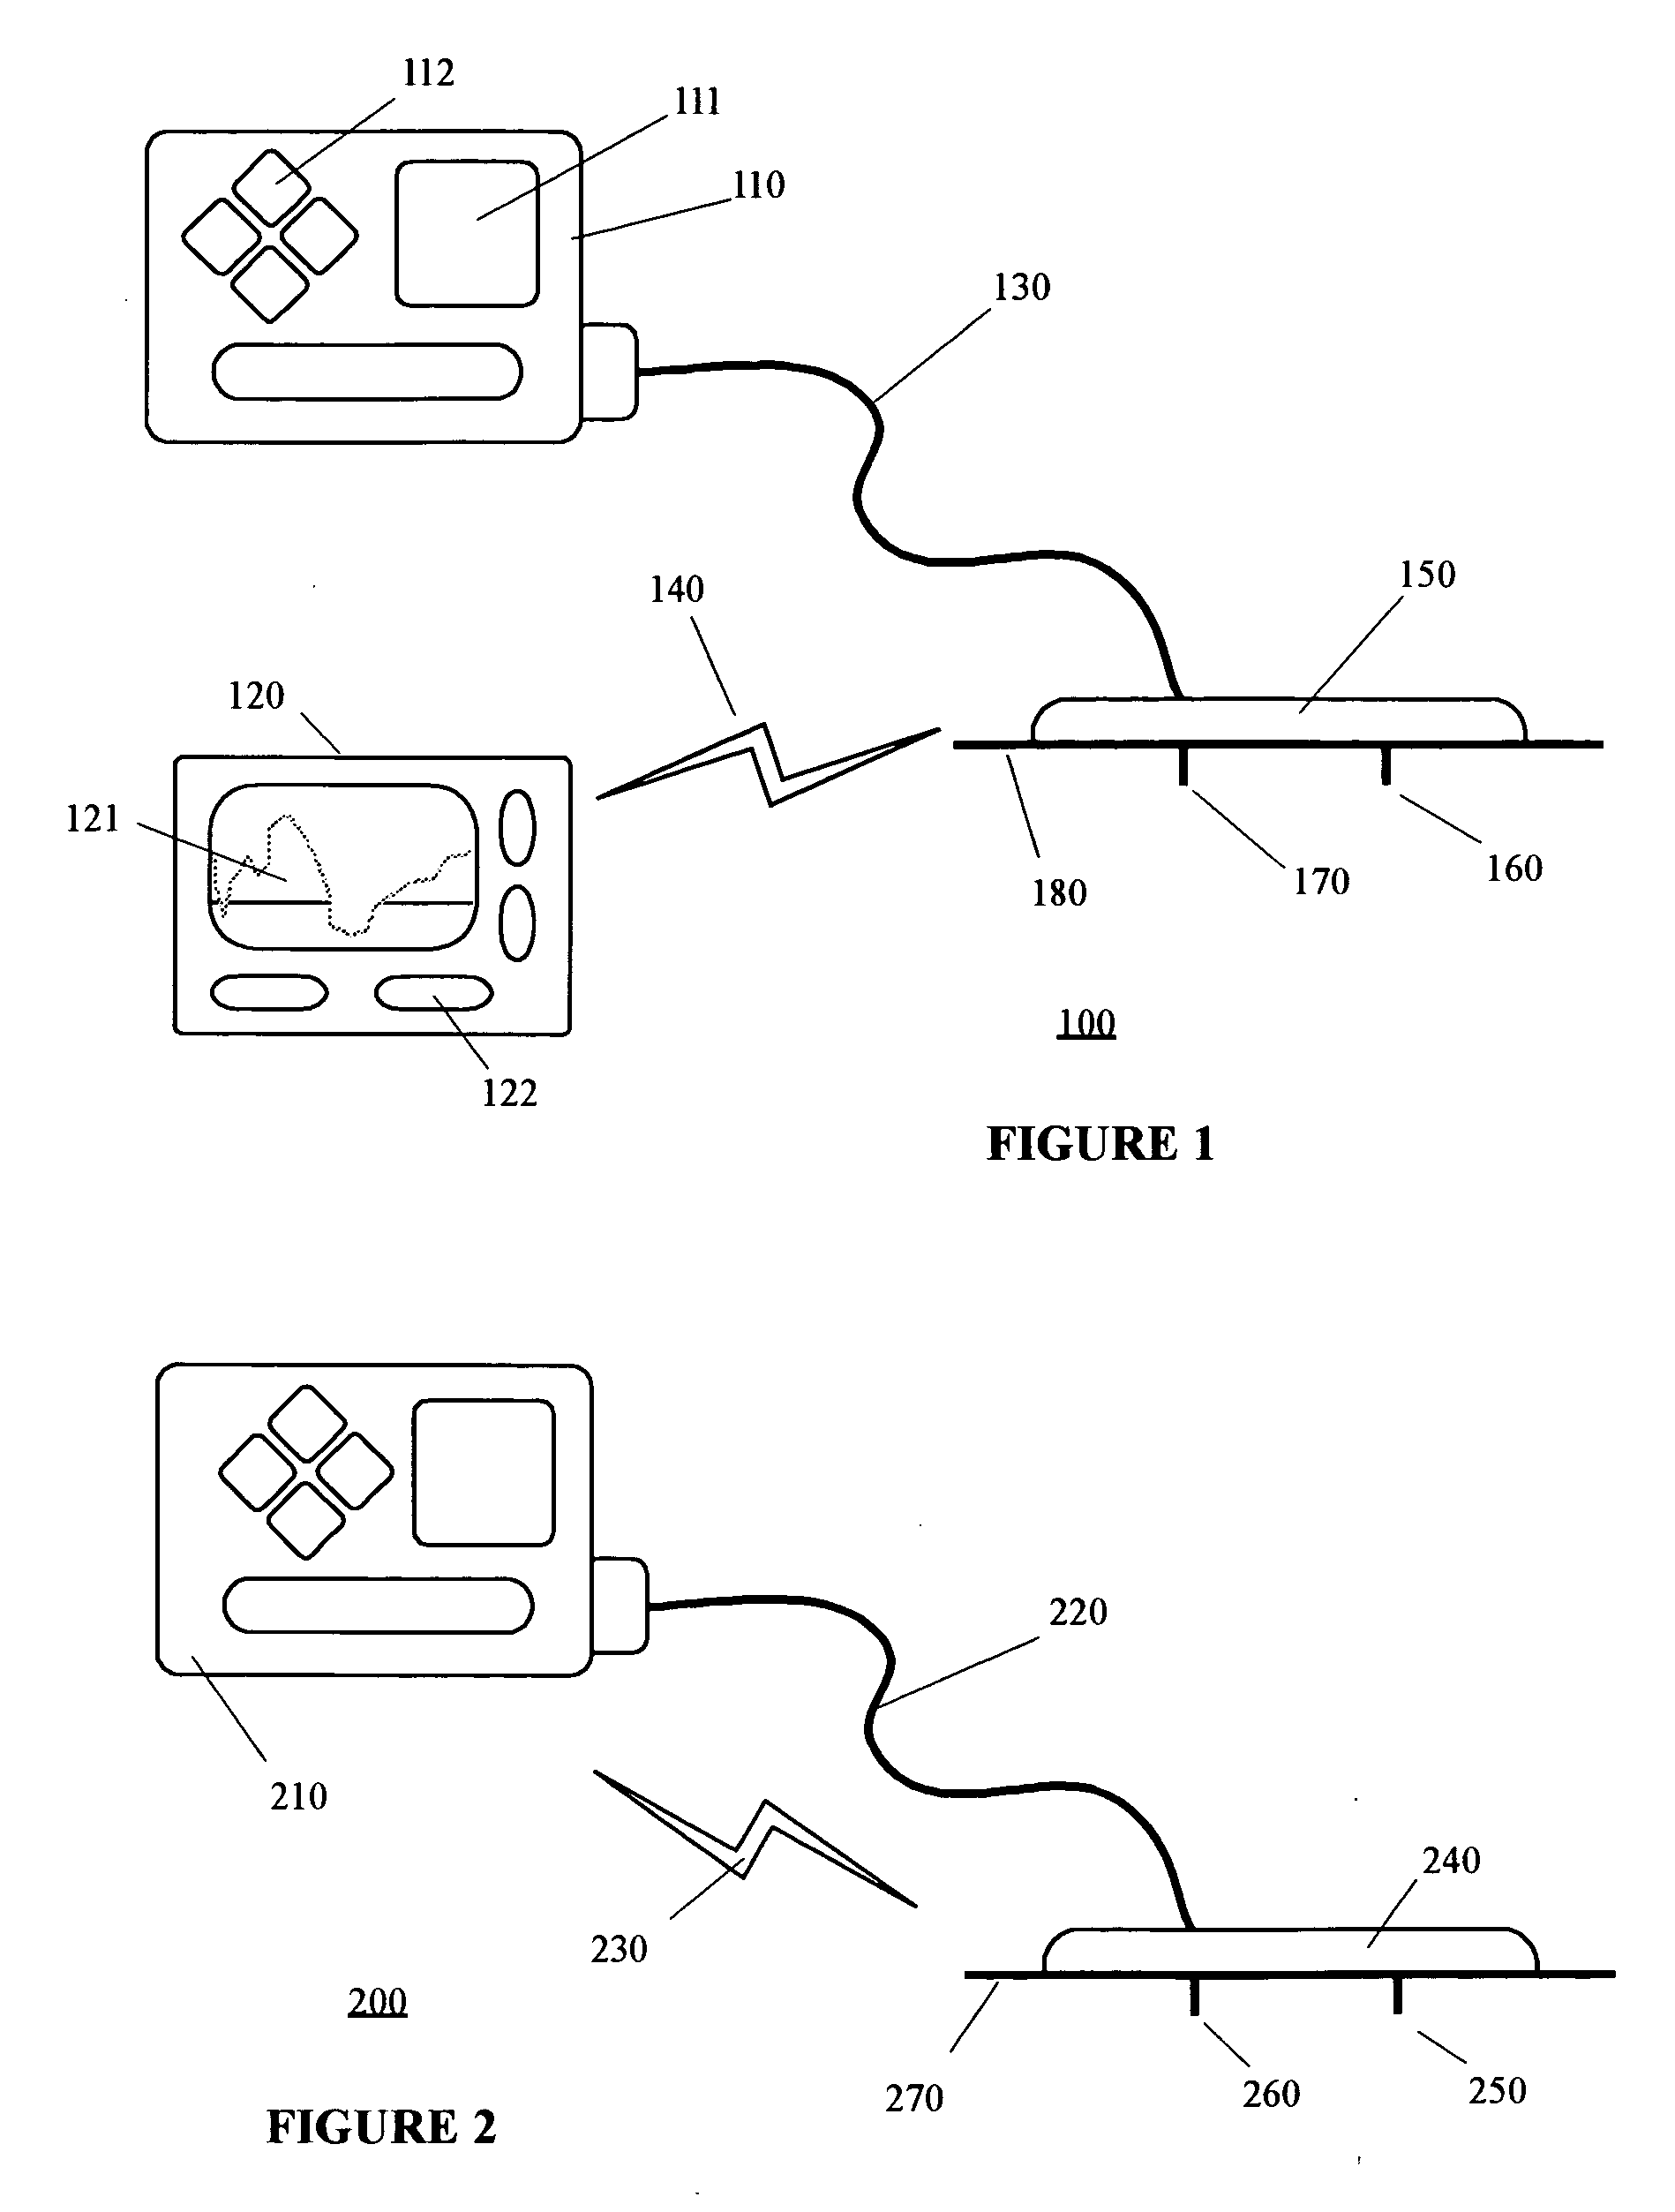 Method and system for providing integrated medication infusion and analyte monitoring system